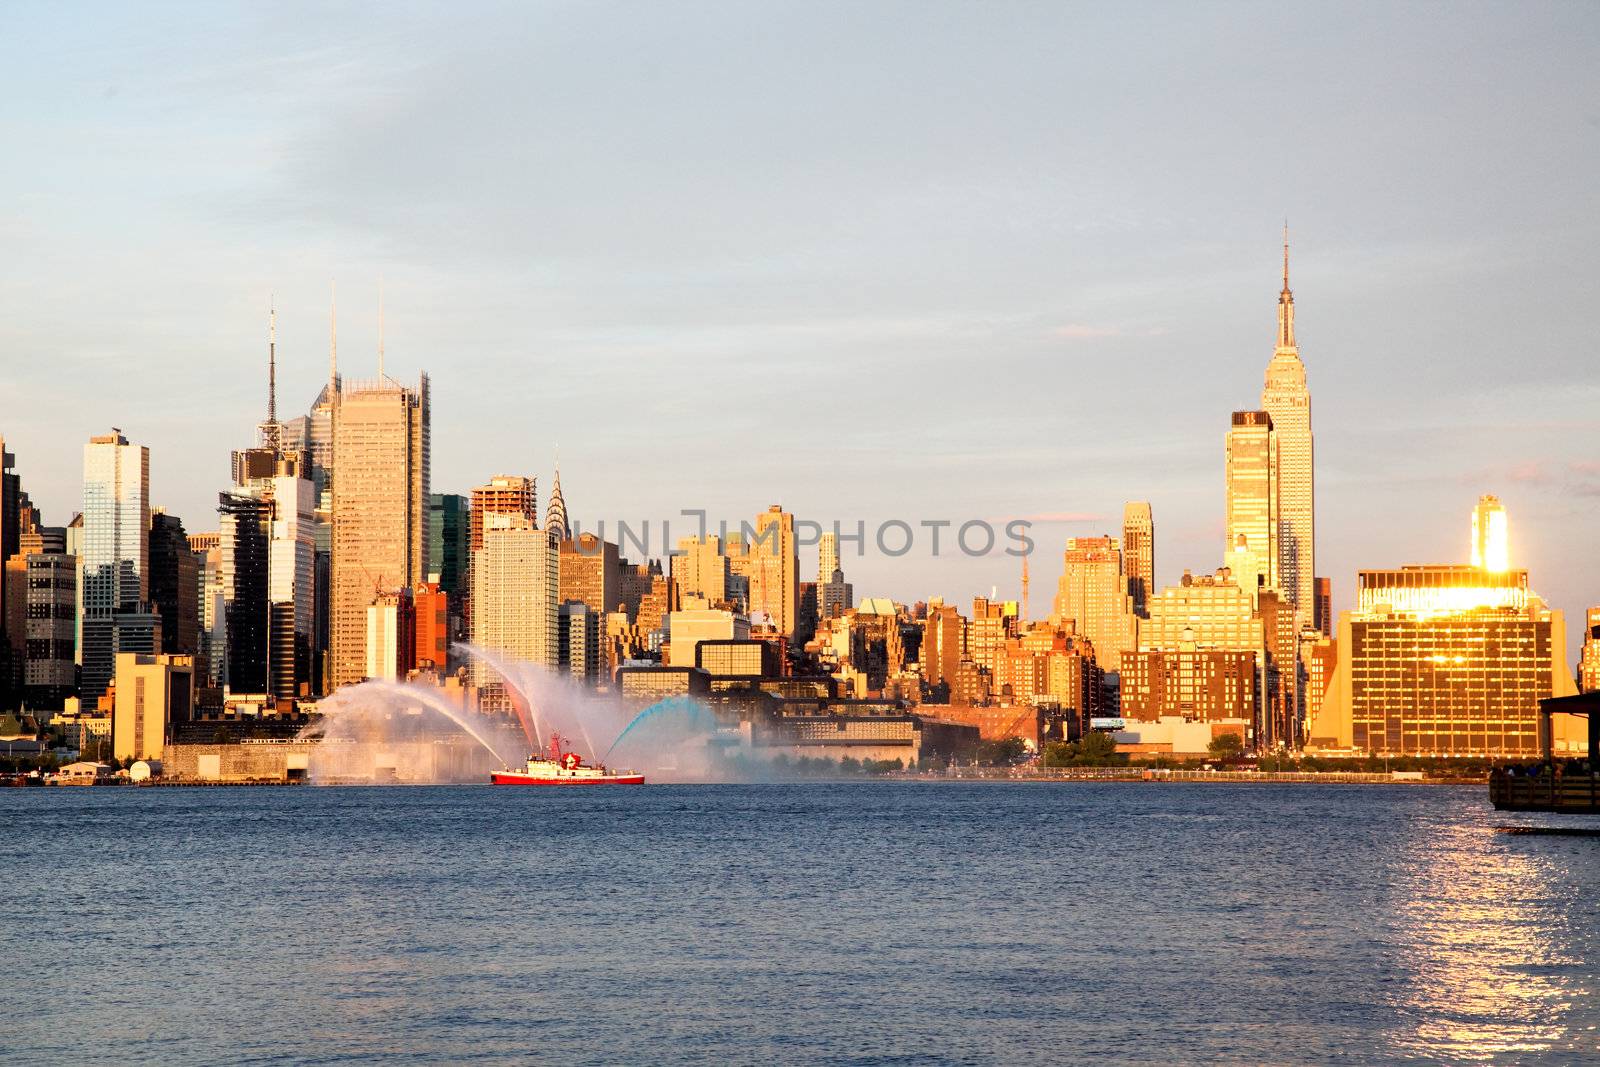 NEW YORK CITY - JULY 4, 2009: Fireboat water spree prior to Mary's 4th of July fireworks 